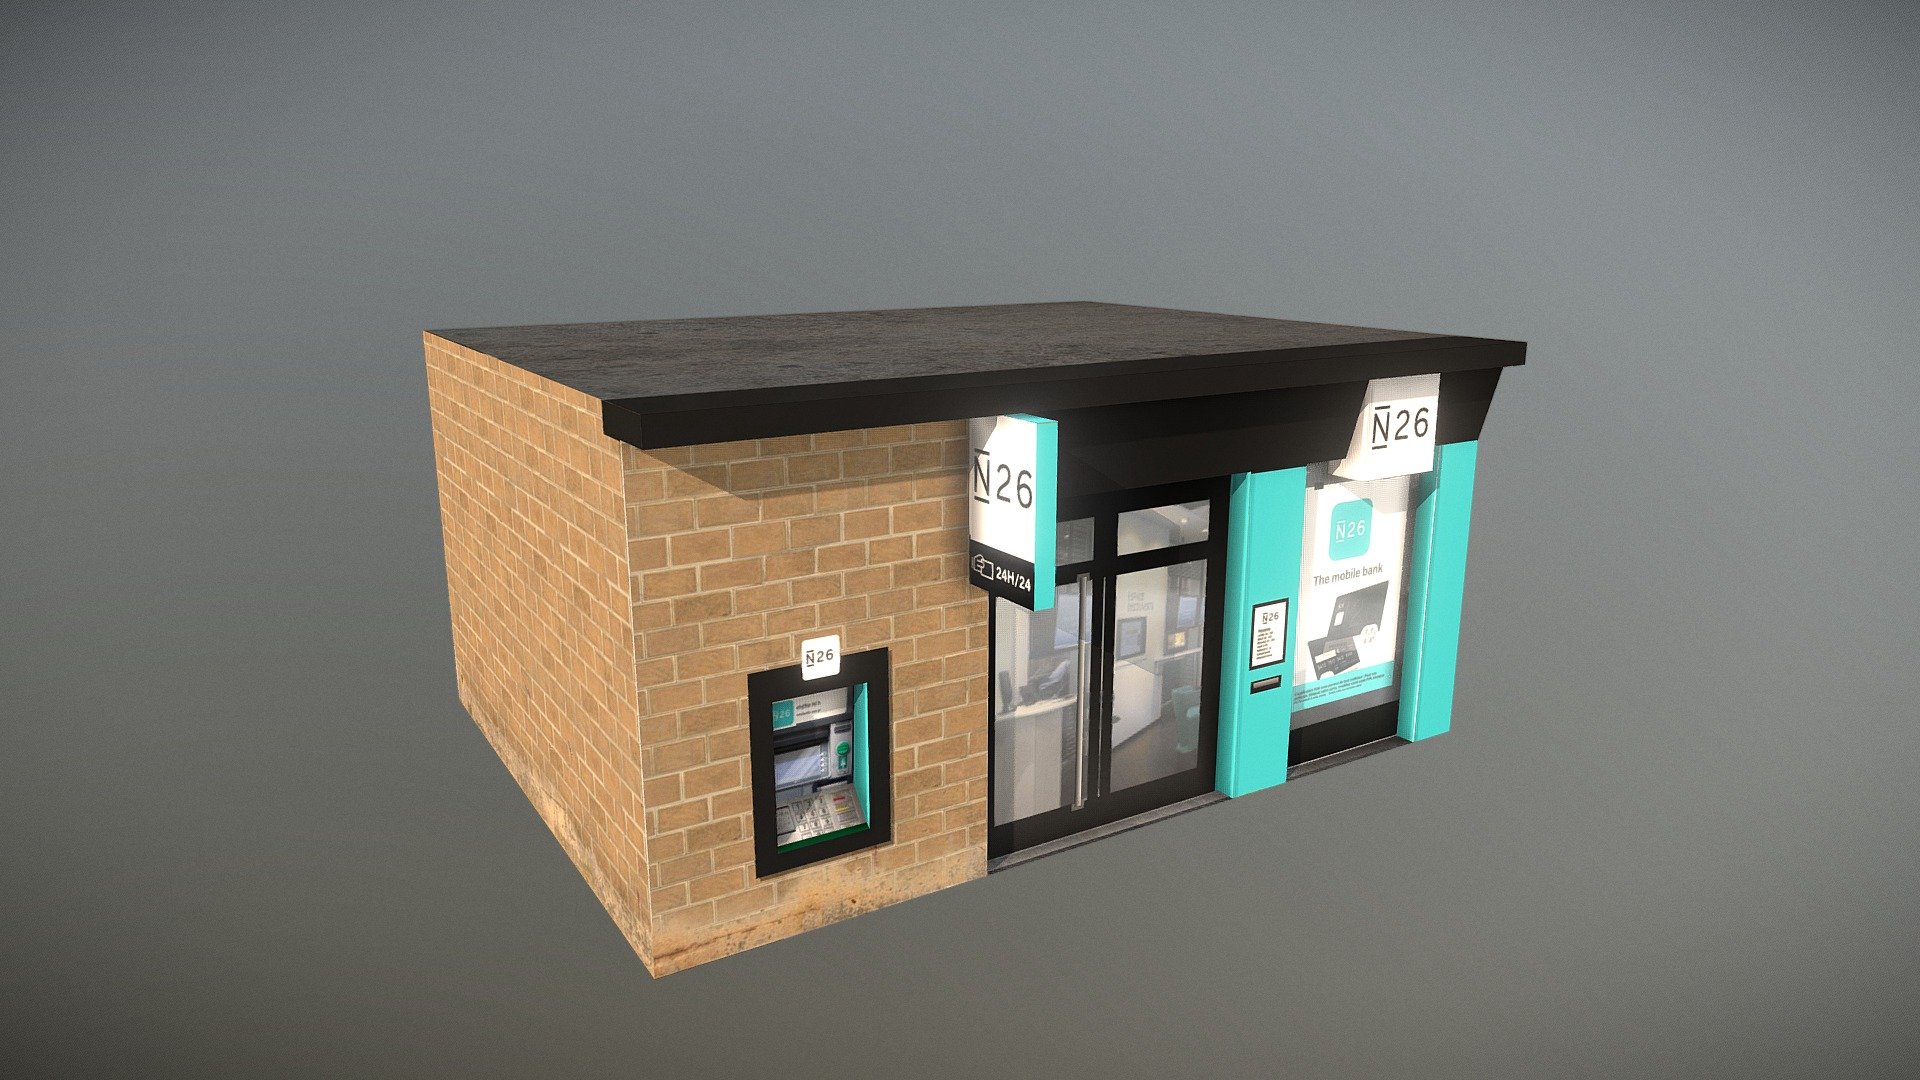 Local agency of the (normally only mobile) bank N26.
Asset created for Cities:Skylines 3d model